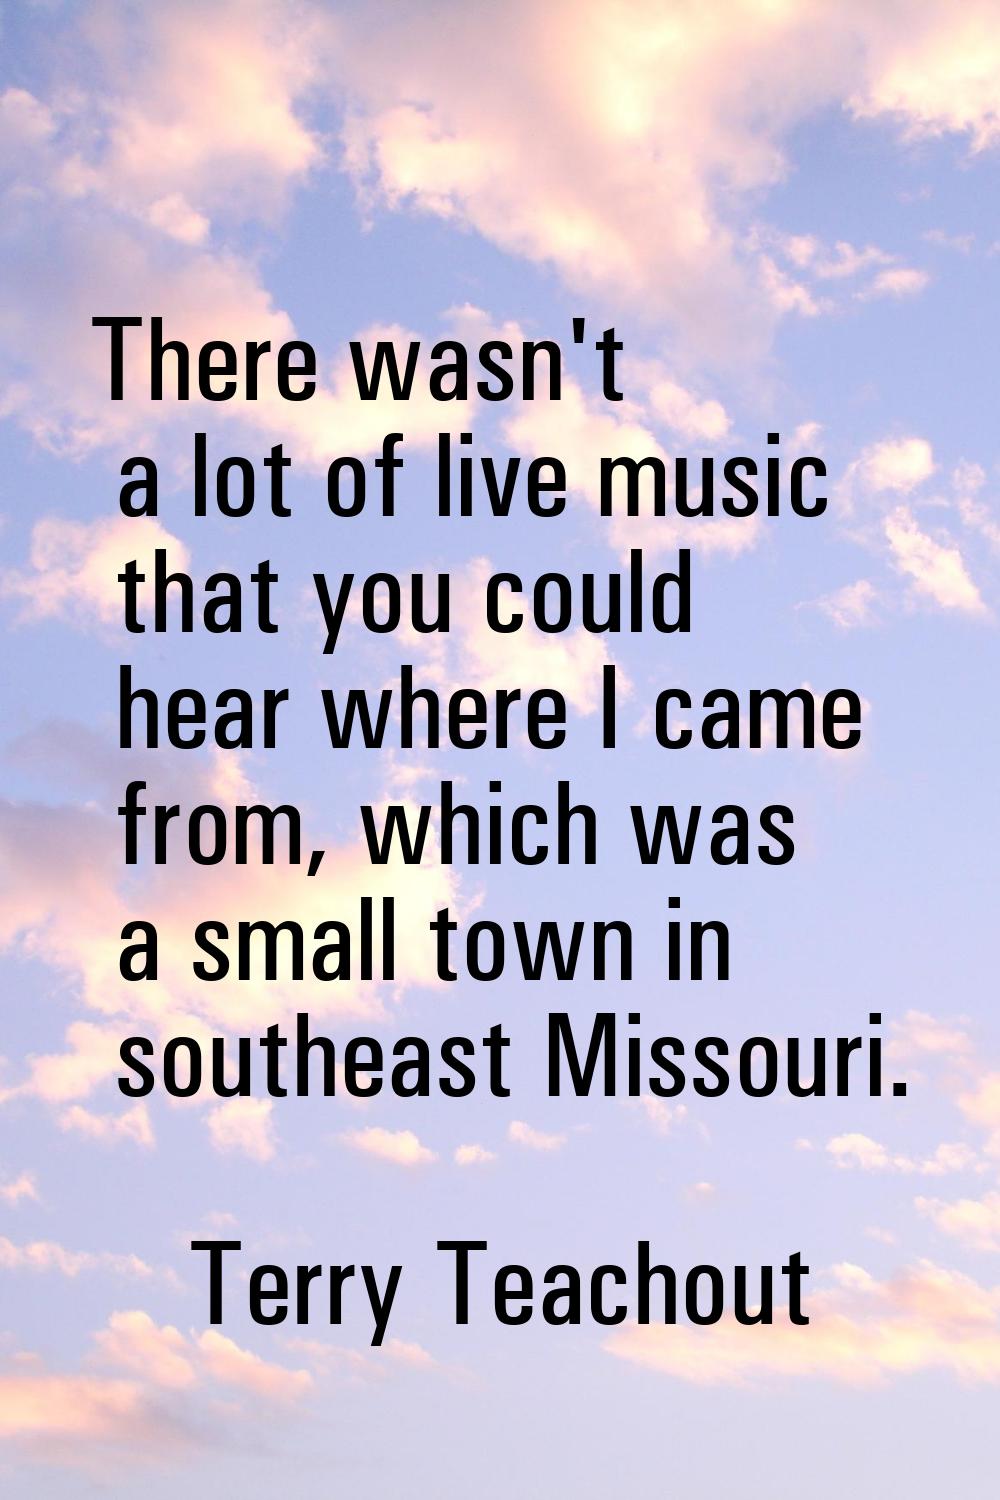 There wasn't a lot of live music that you could hear where I came from, which was a small town in s